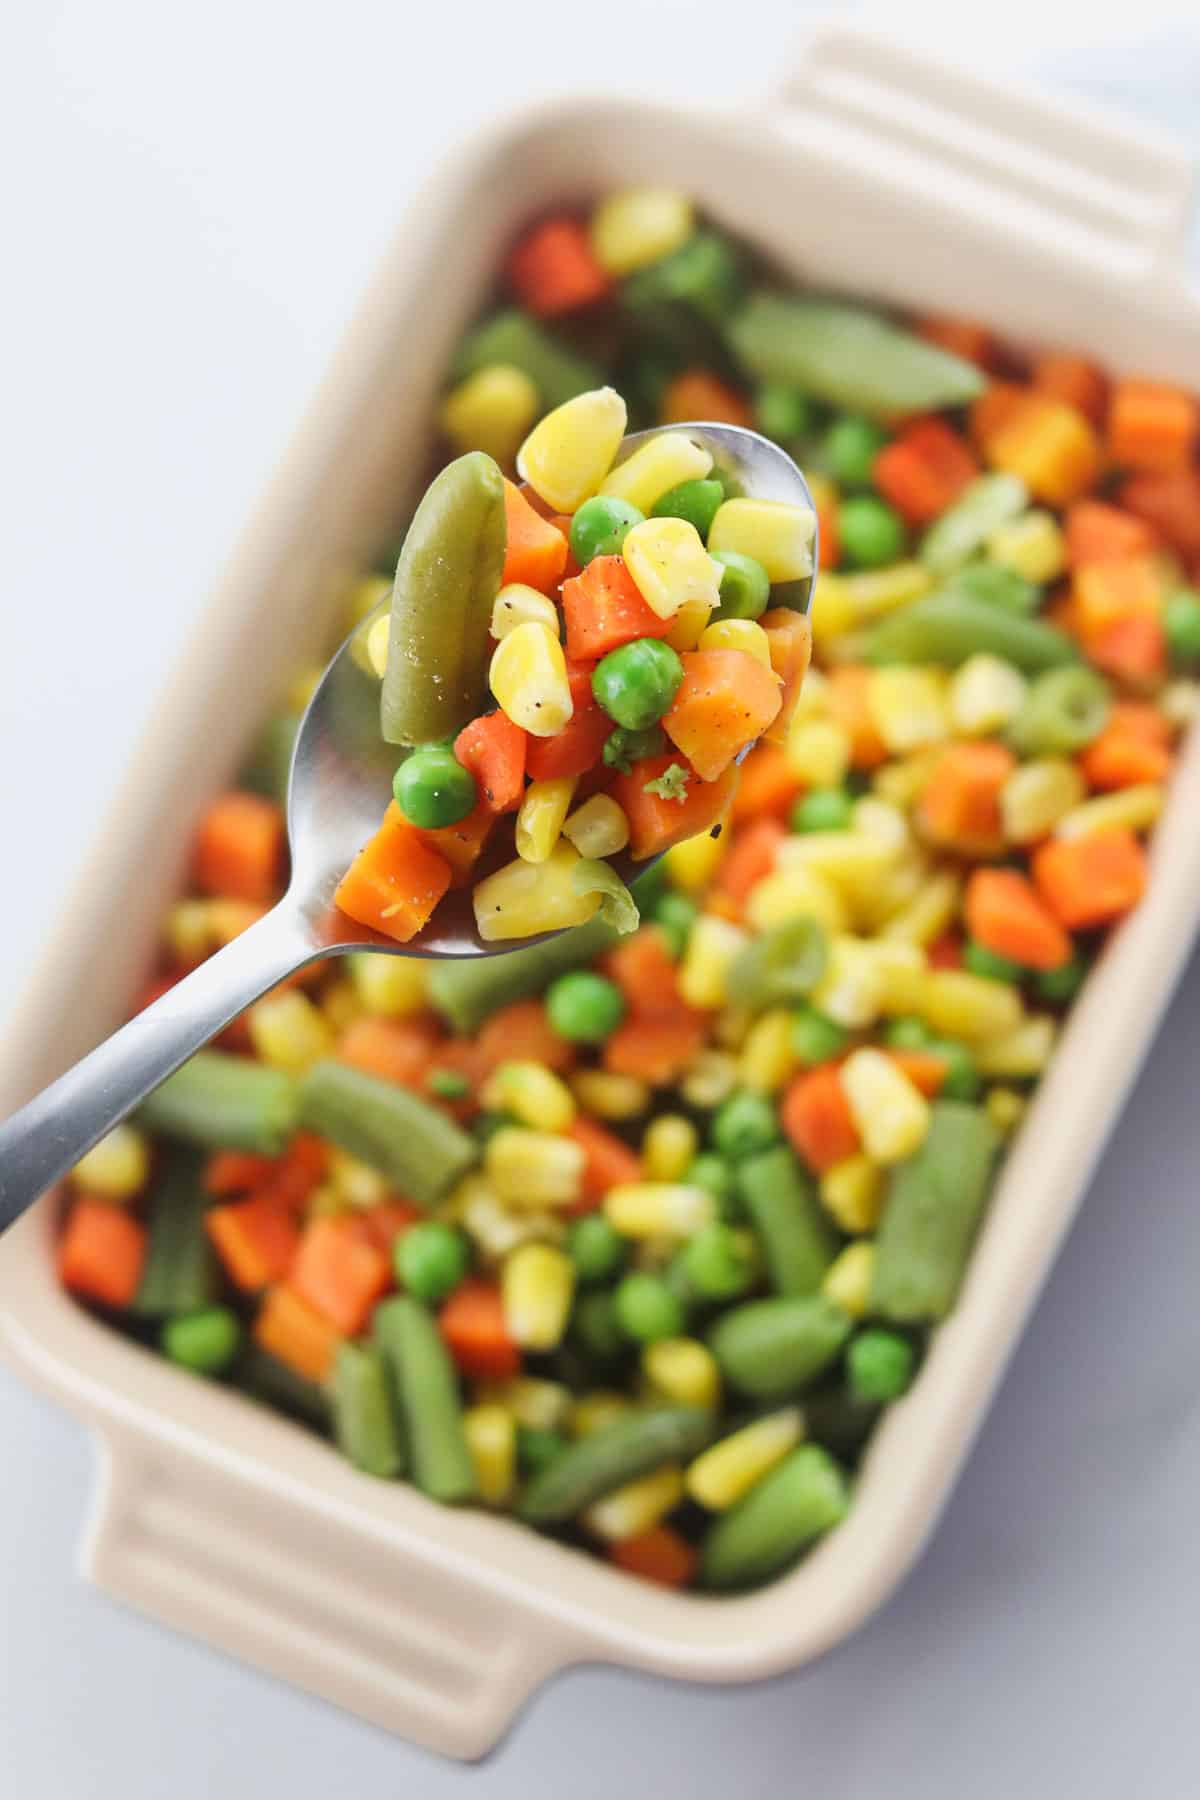 scooping a spoonful of mixed vegetables including corn, green beans, carrots, and peas